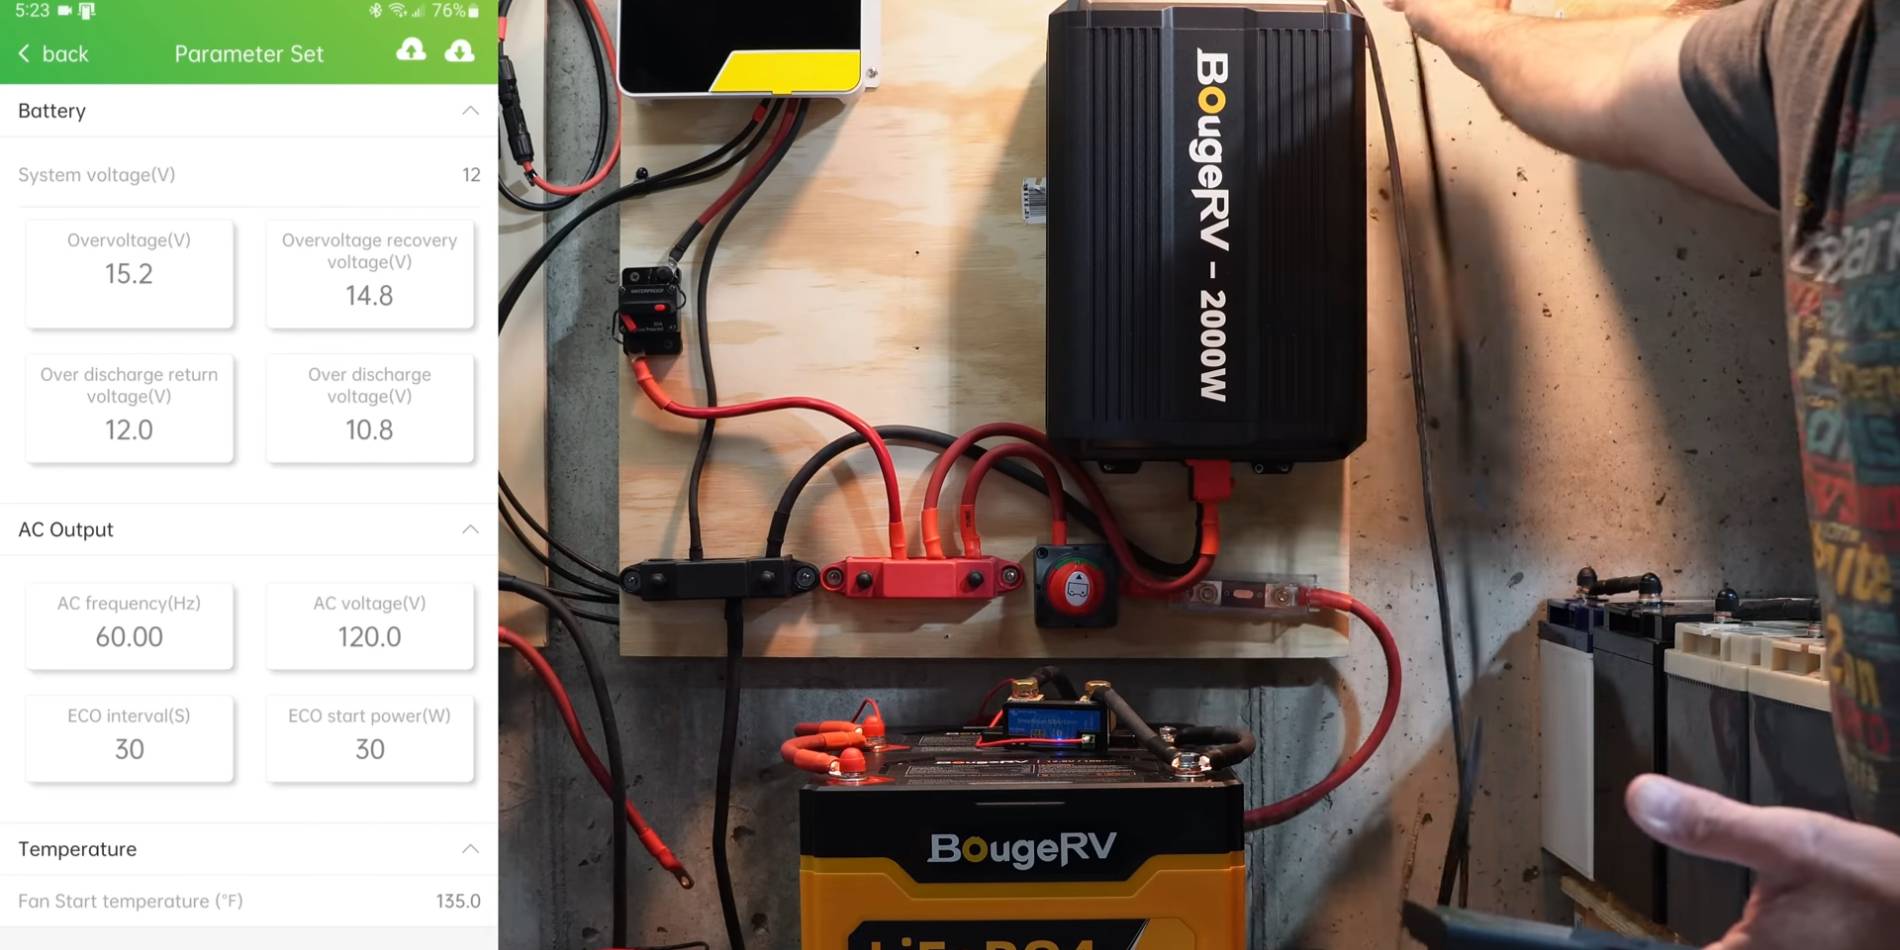 Installing BougeRV’s 2000W inverter, LiFeP04 battery, and MPPT charge controller on a wood plate